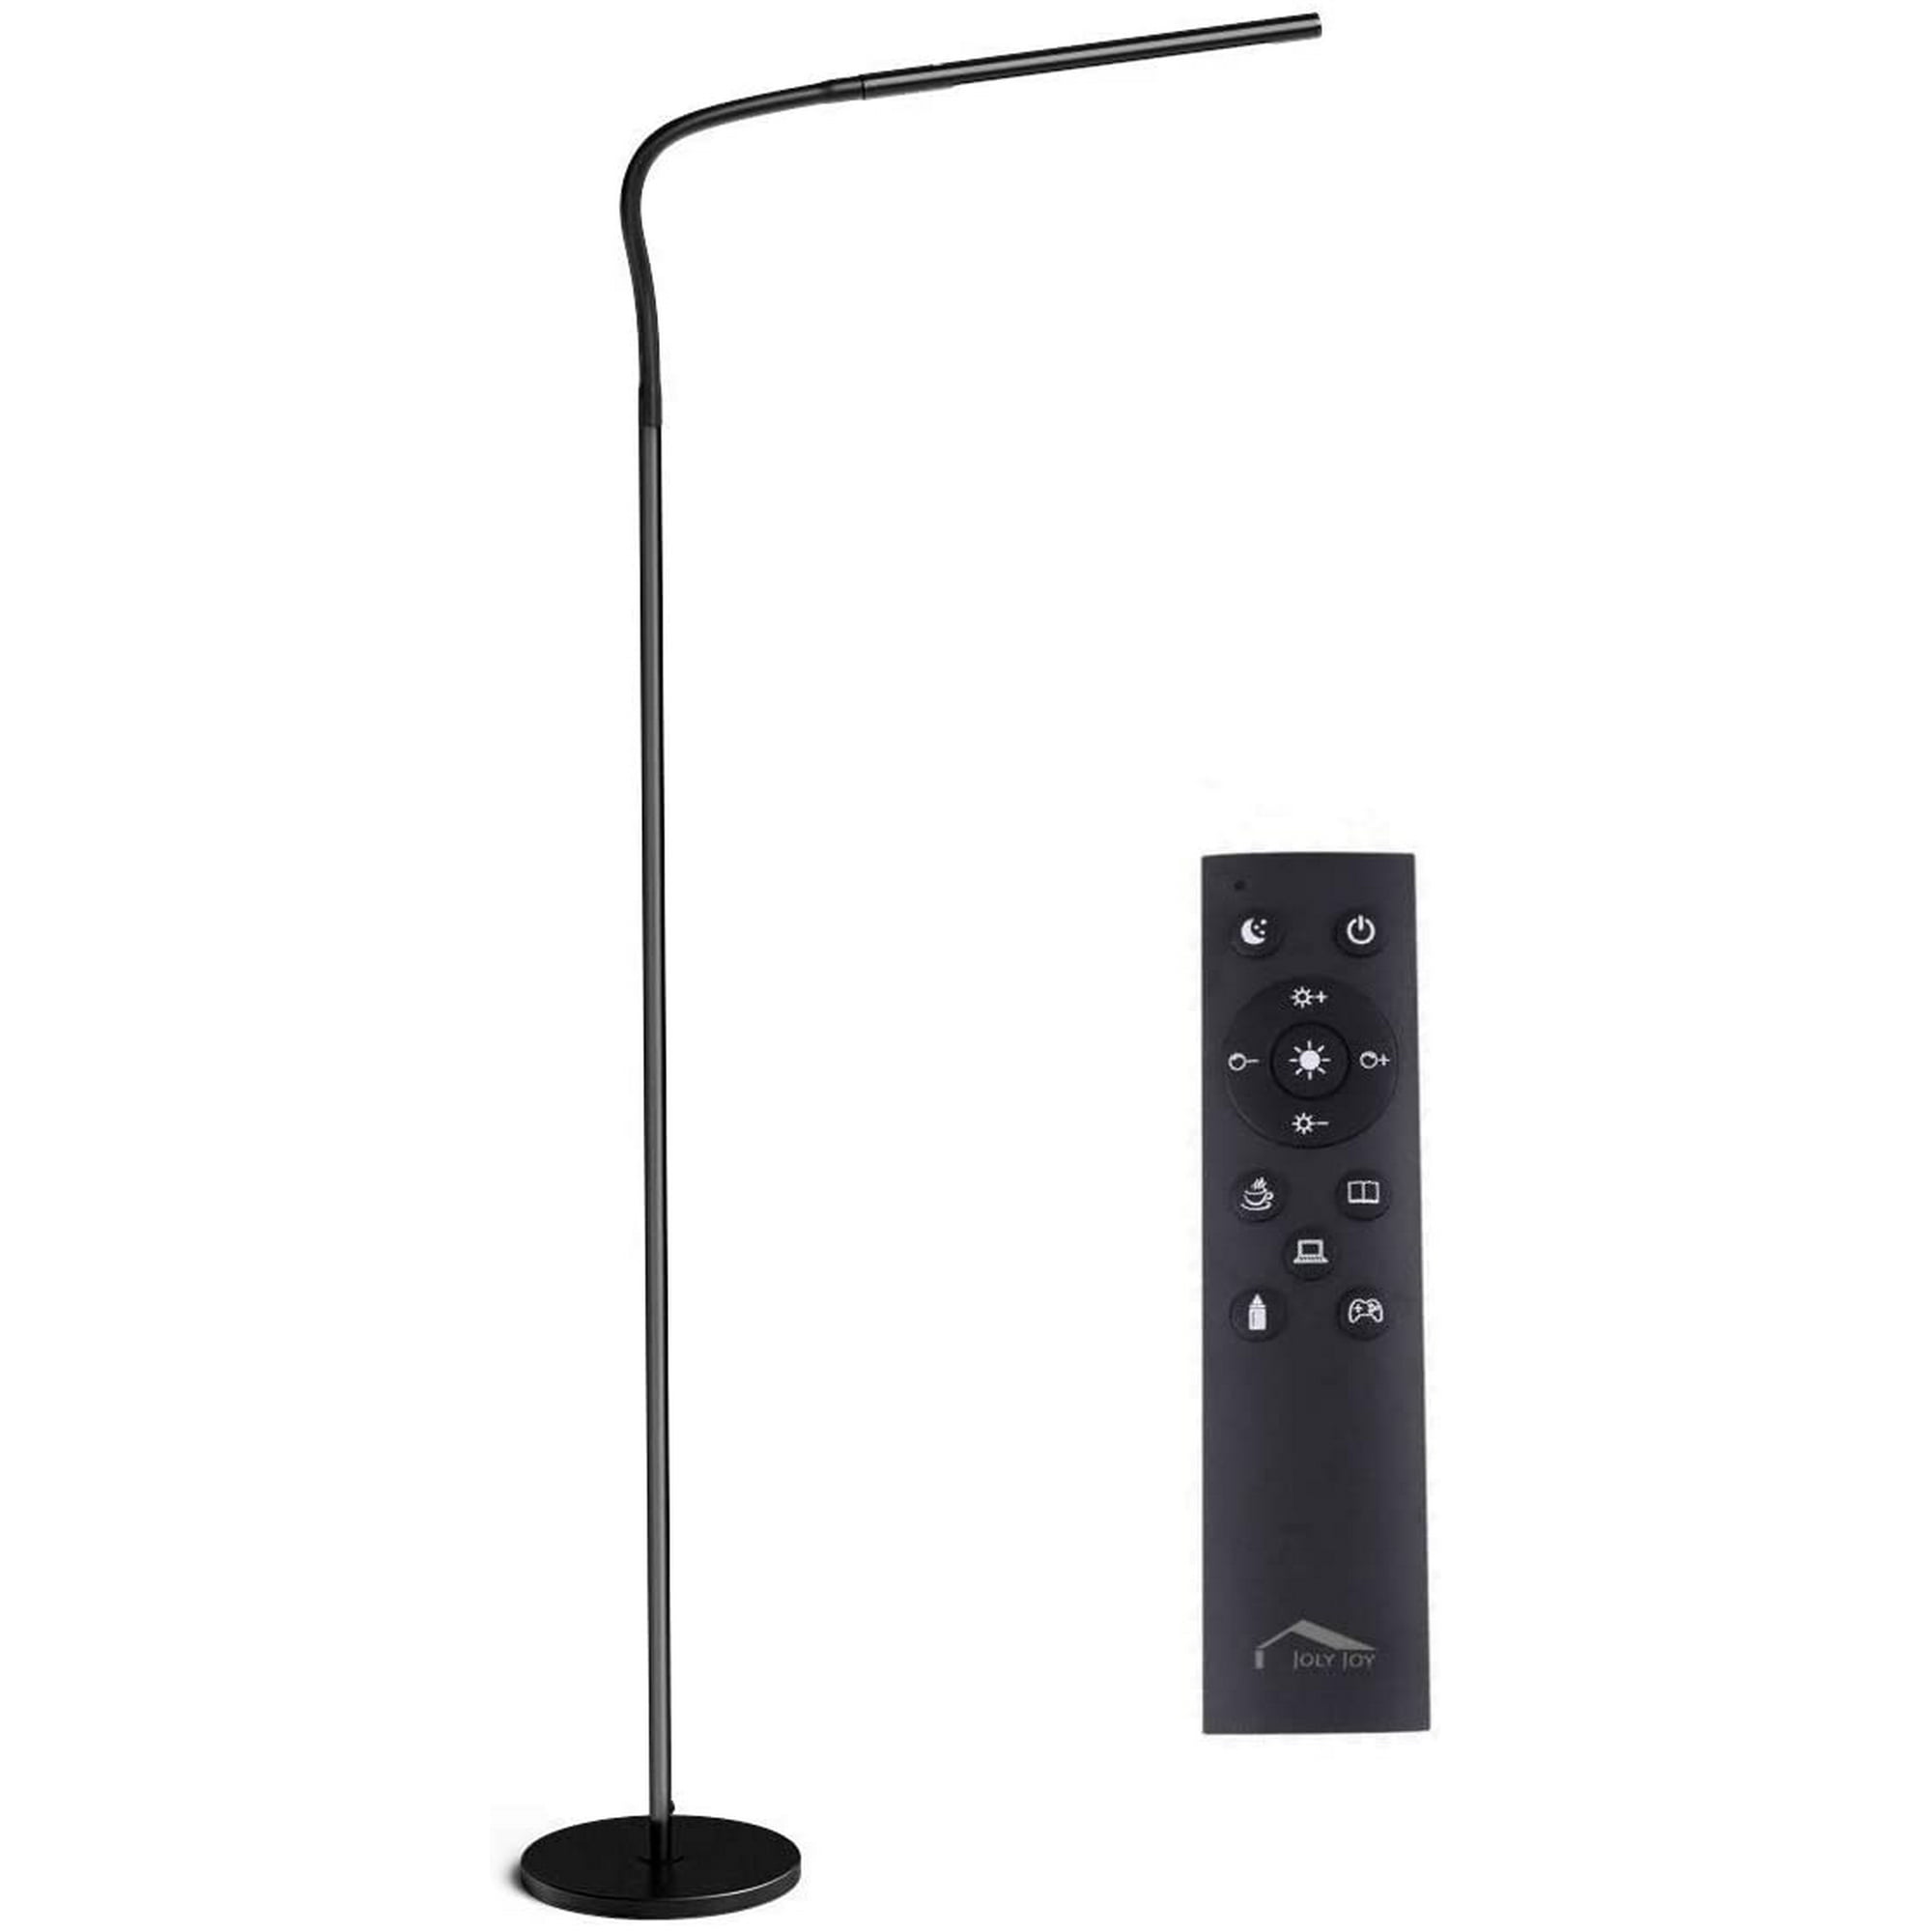 Floor Lamp Living Room, Joly Joy Floor Lamps for Living Room, 12W Dimmable  Flexible Gooseneck Standing Lamp, Reading Light with Touch Remote Control,  4 Color & 5 Brightness Dimmer, D Floor Lights